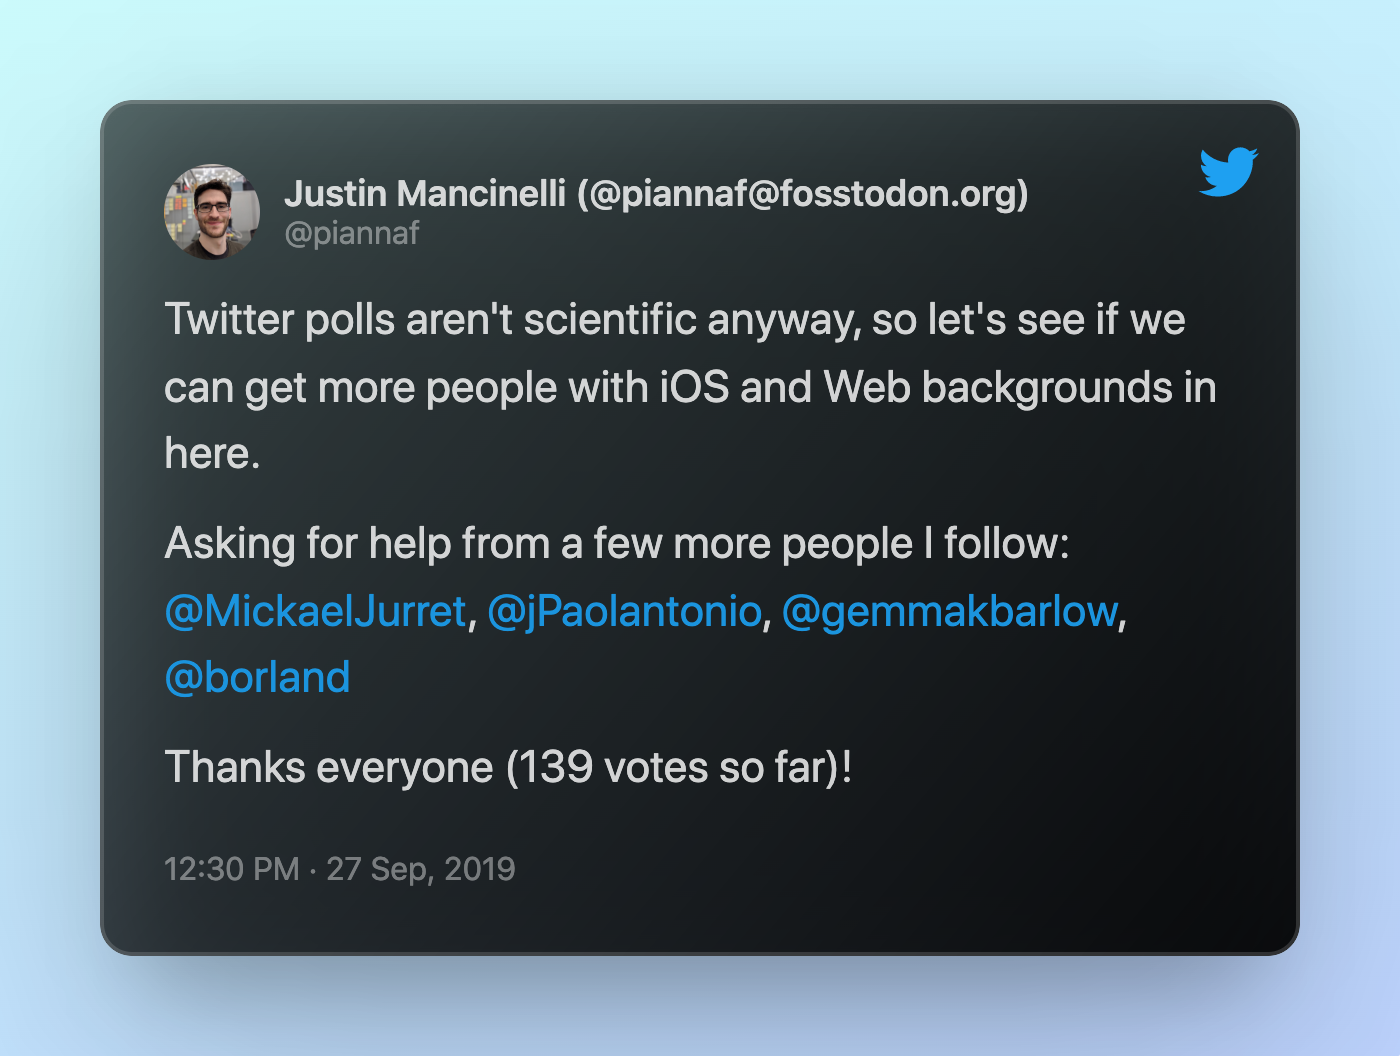 Tweet asking for more engagement from mobile managers with iOS and Web backgrounds